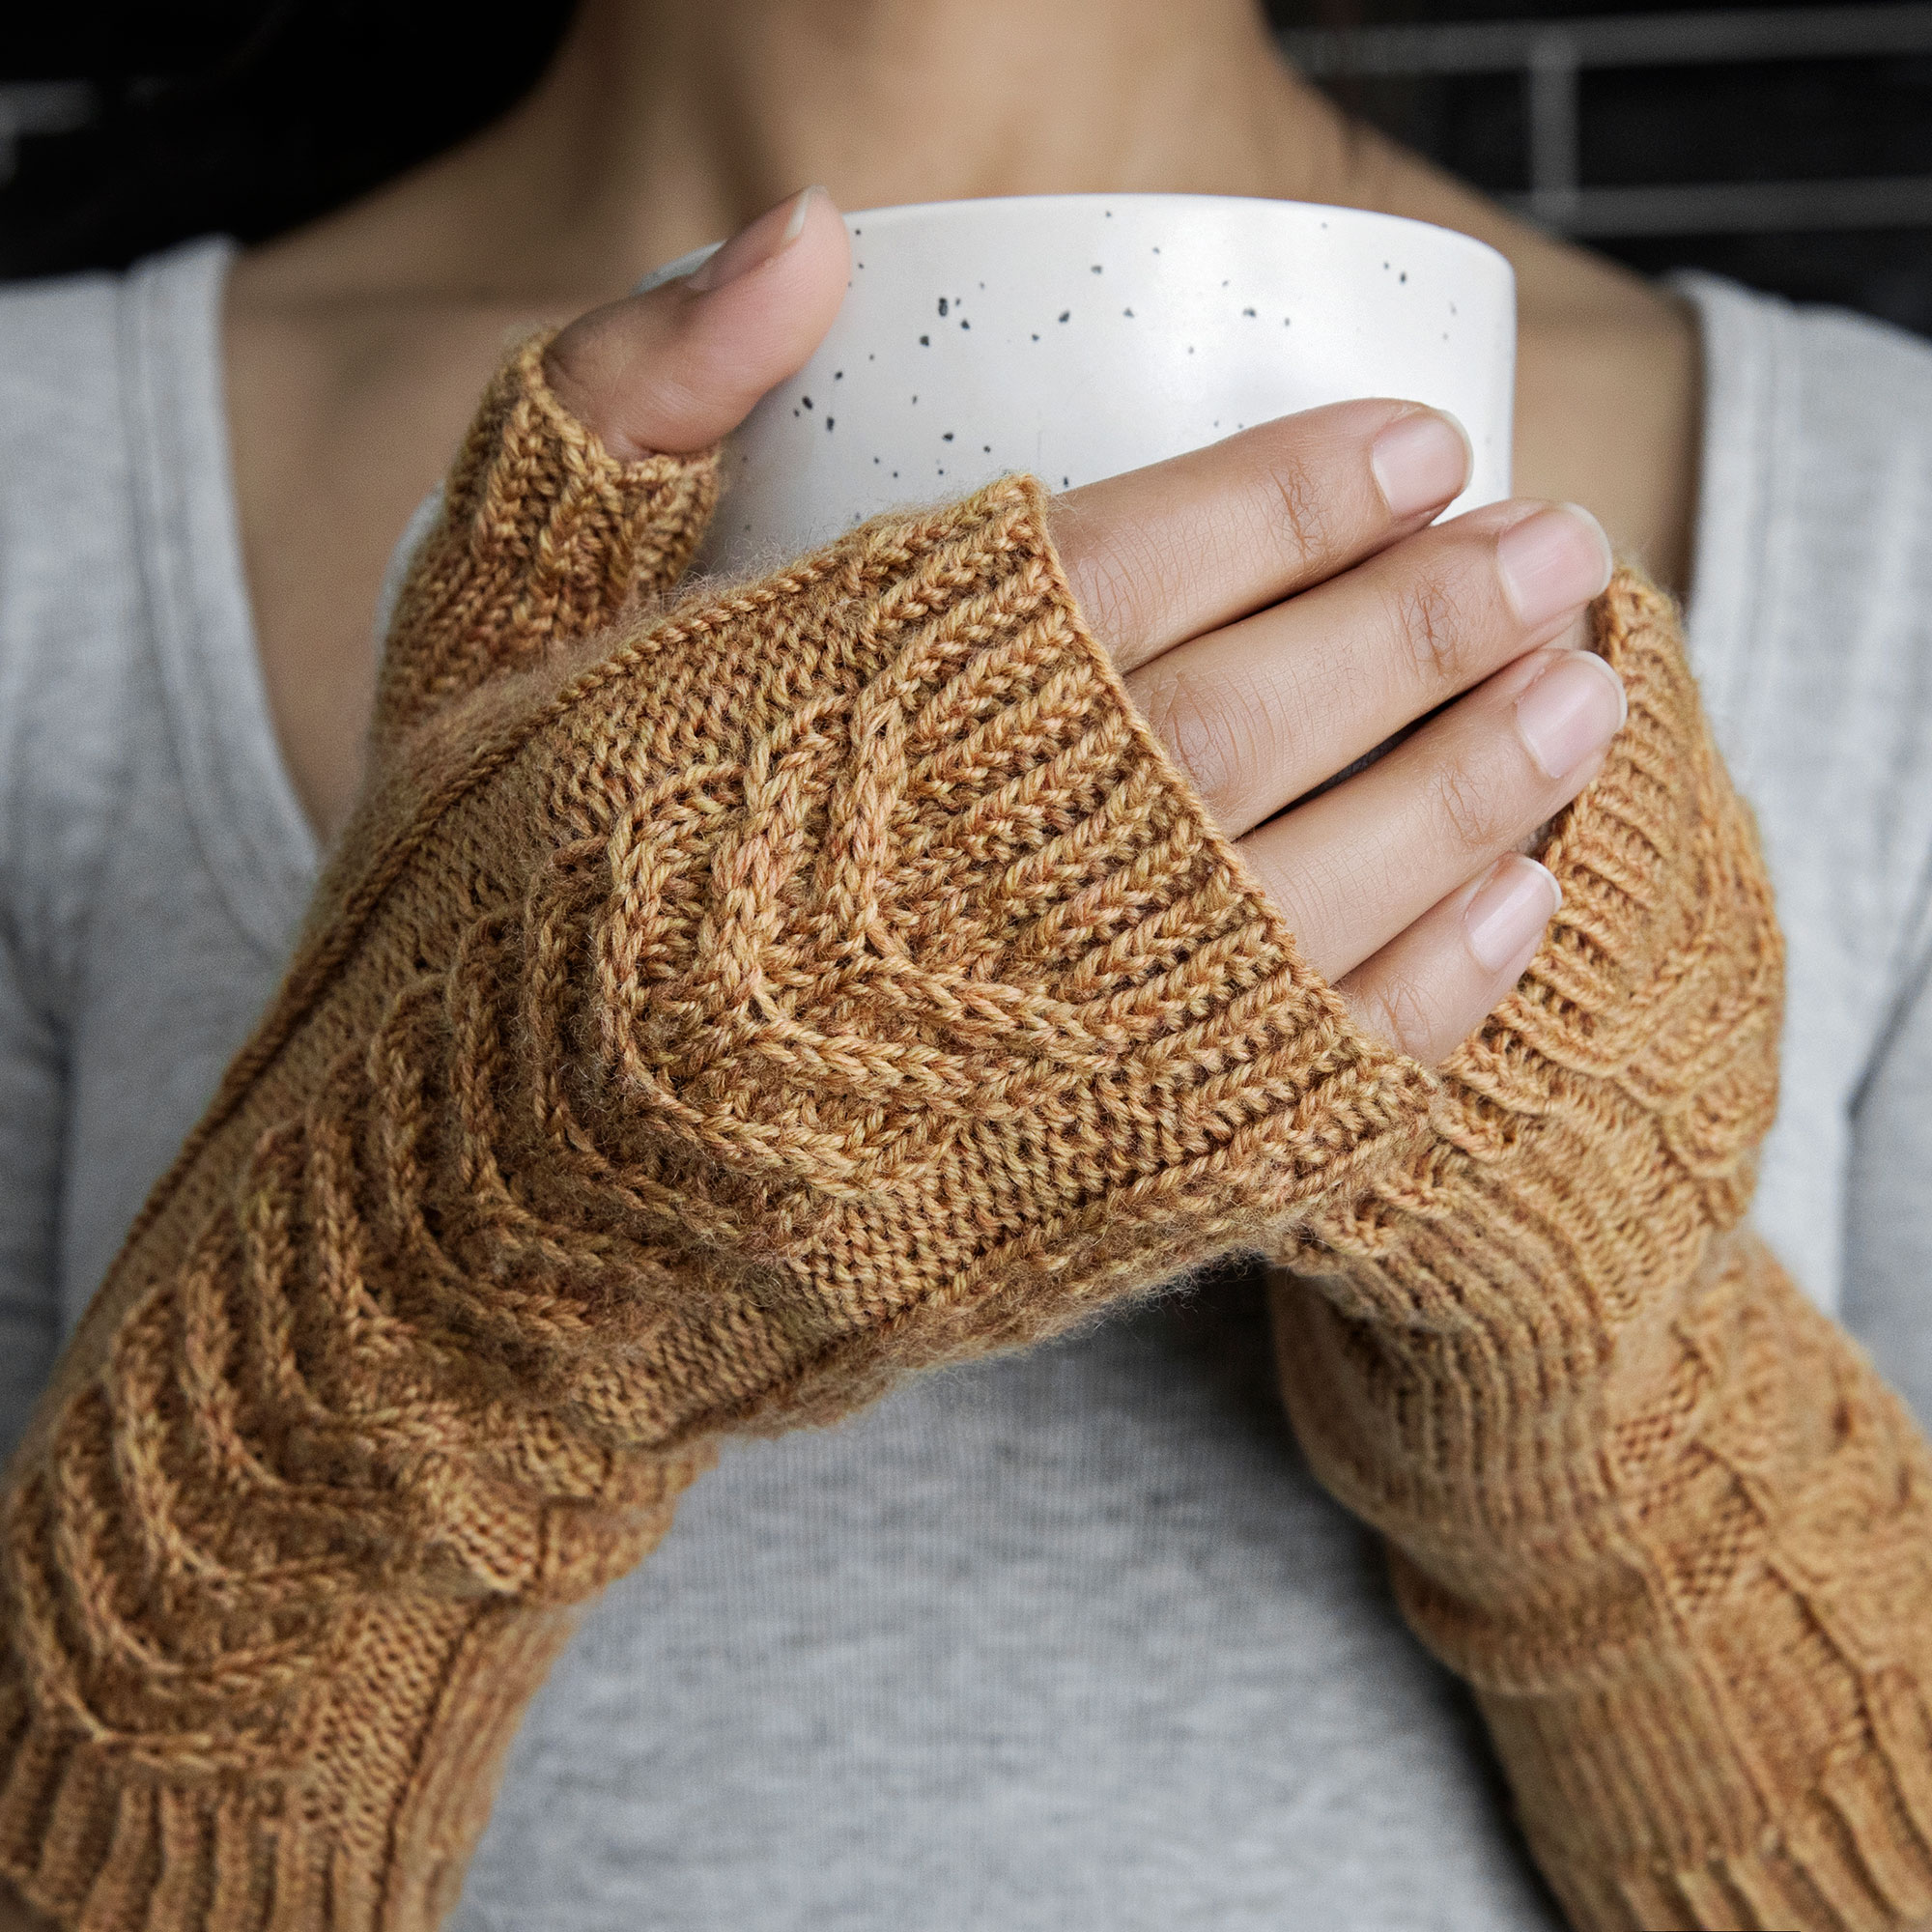 How to knit gloves with fingers - Step-by-step pattern for